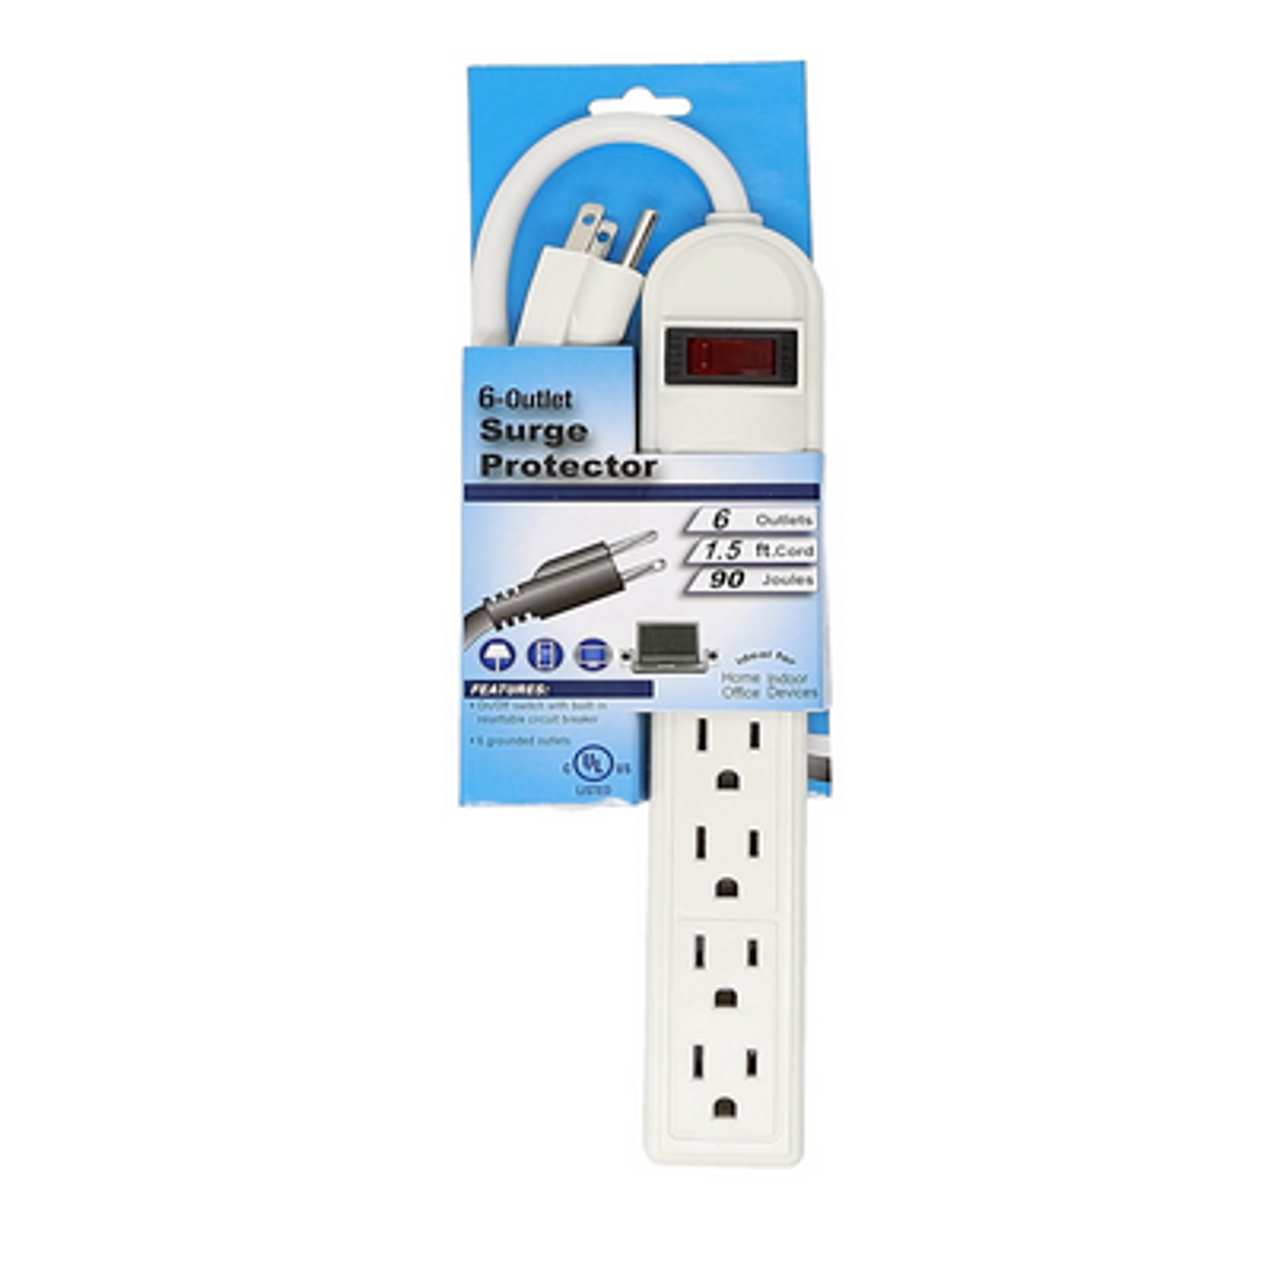 6 Outlet Surge Protector Power Strip w/ 1.5 ft. Cord - White